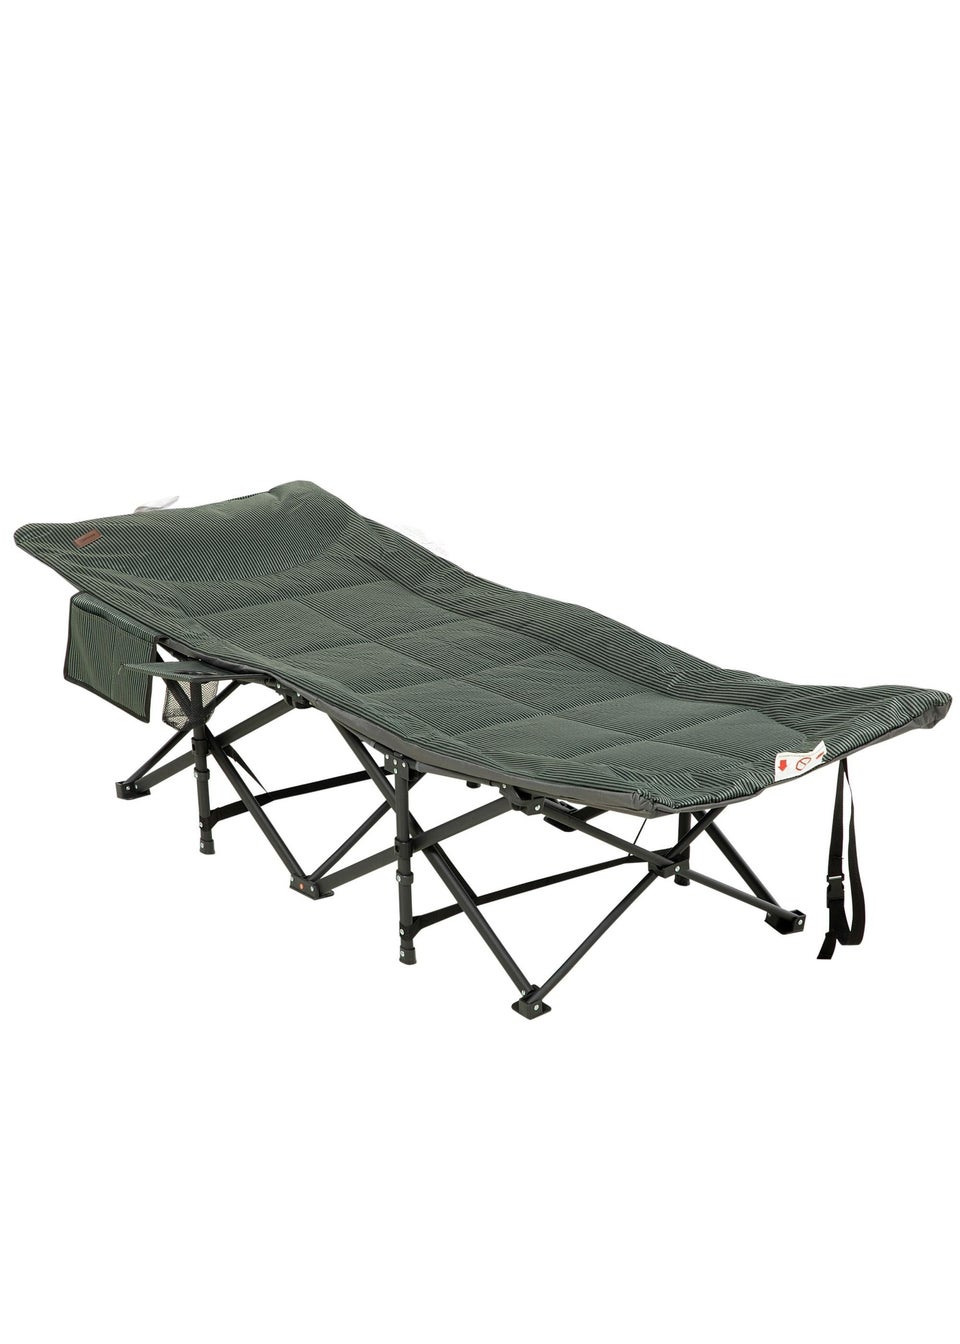 Outsunny Foldable Camping Bed w/ Carry Bag